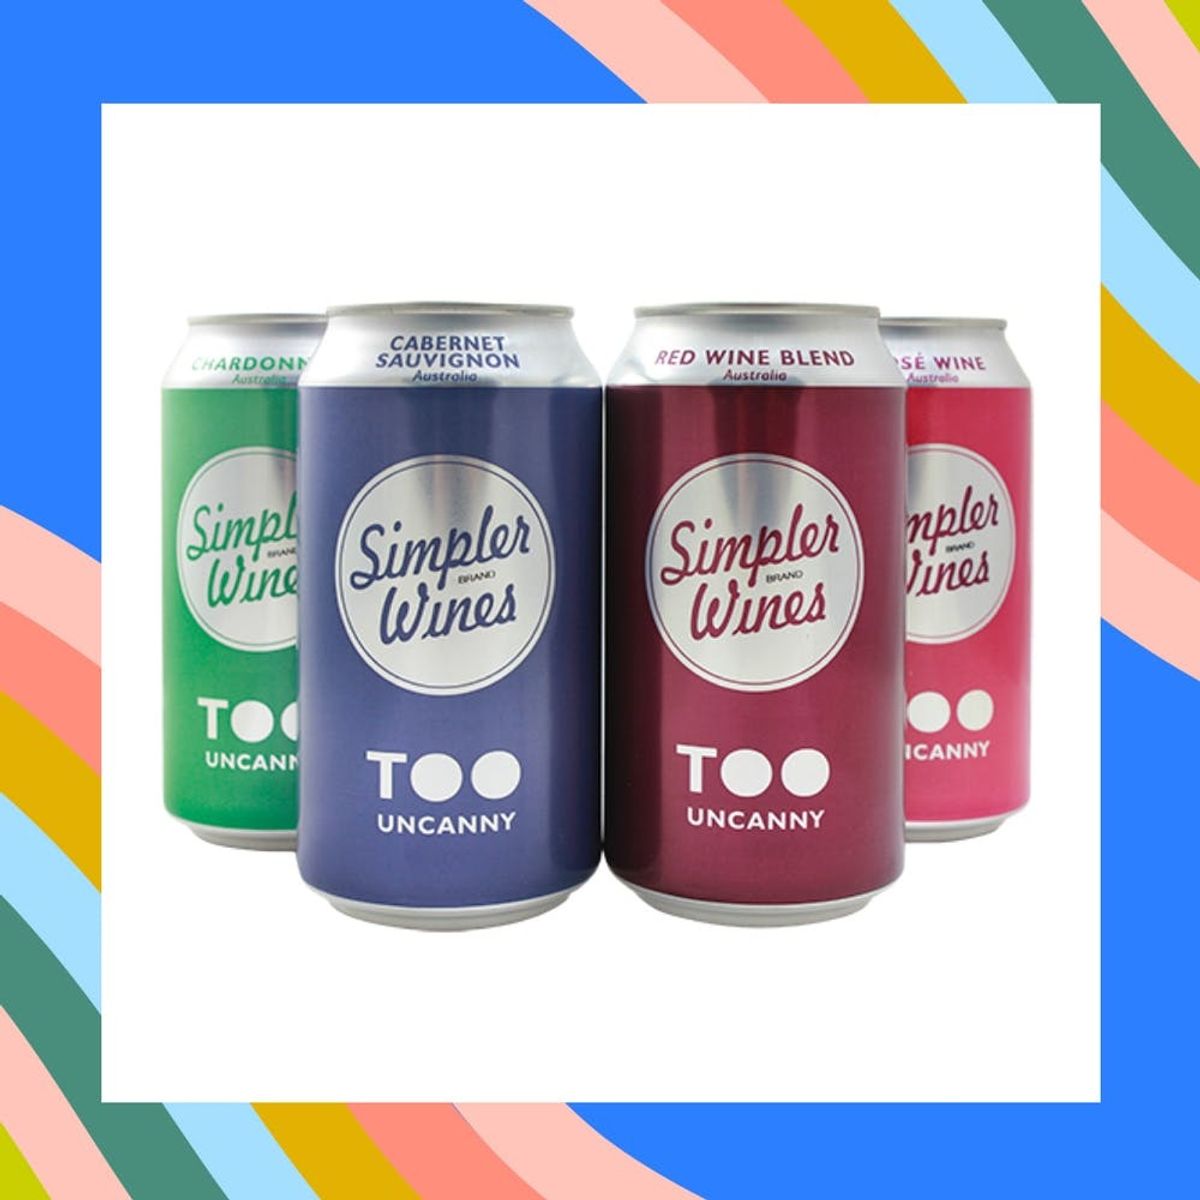 Trader Joe’s Just Launched MORE Affordable Canned Wine for Your Summer Enjoyment